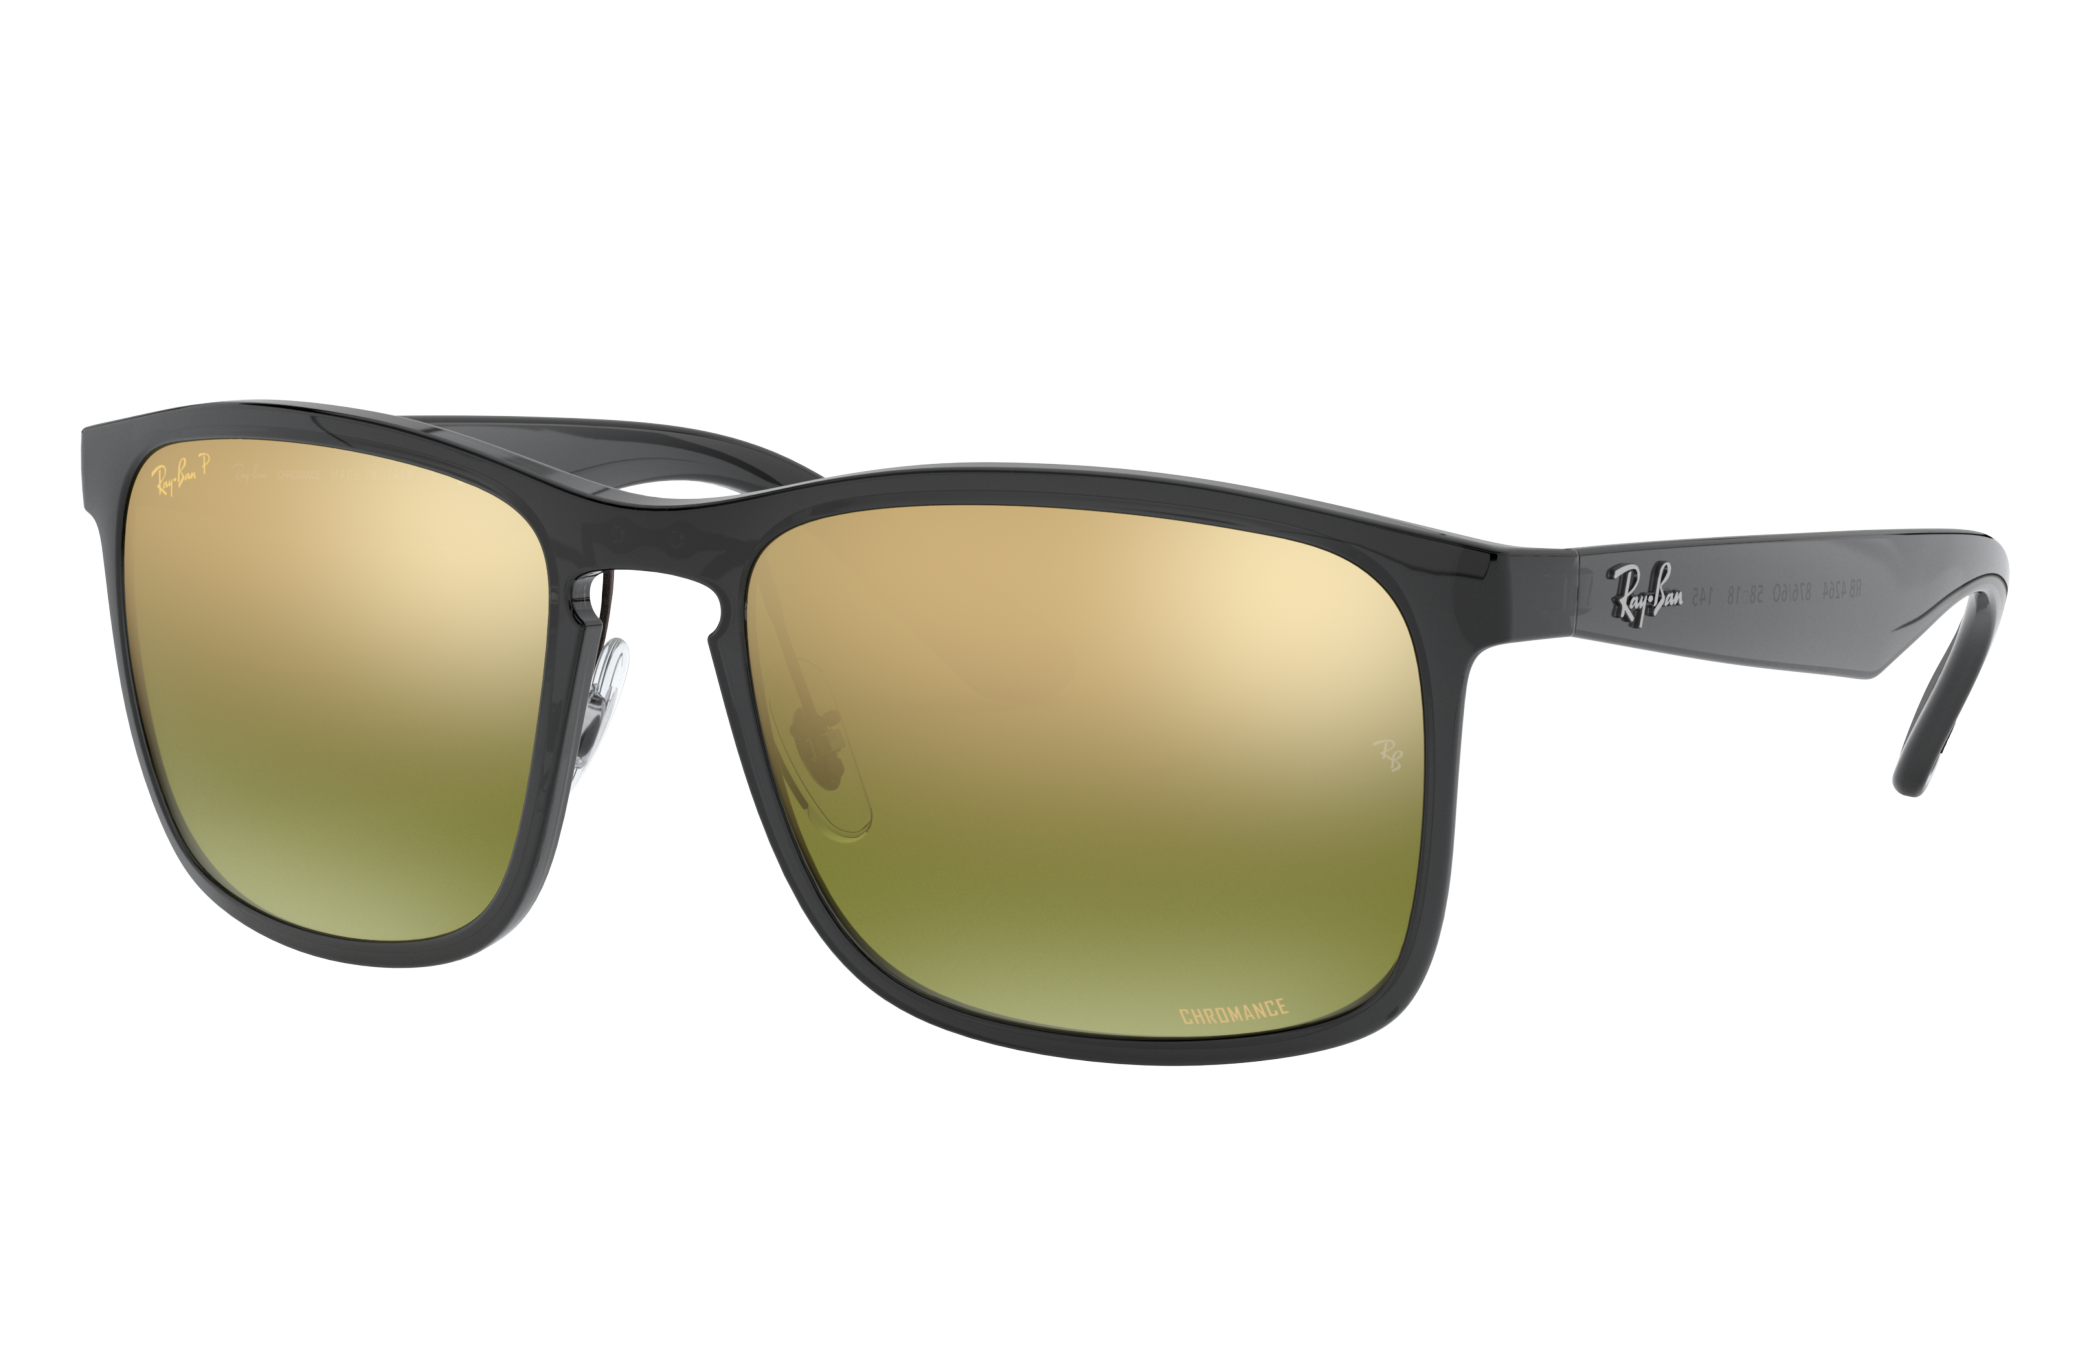 Rb4264 Chromance Sunglasses in Grey and Green Chromance | Ray-Ban®